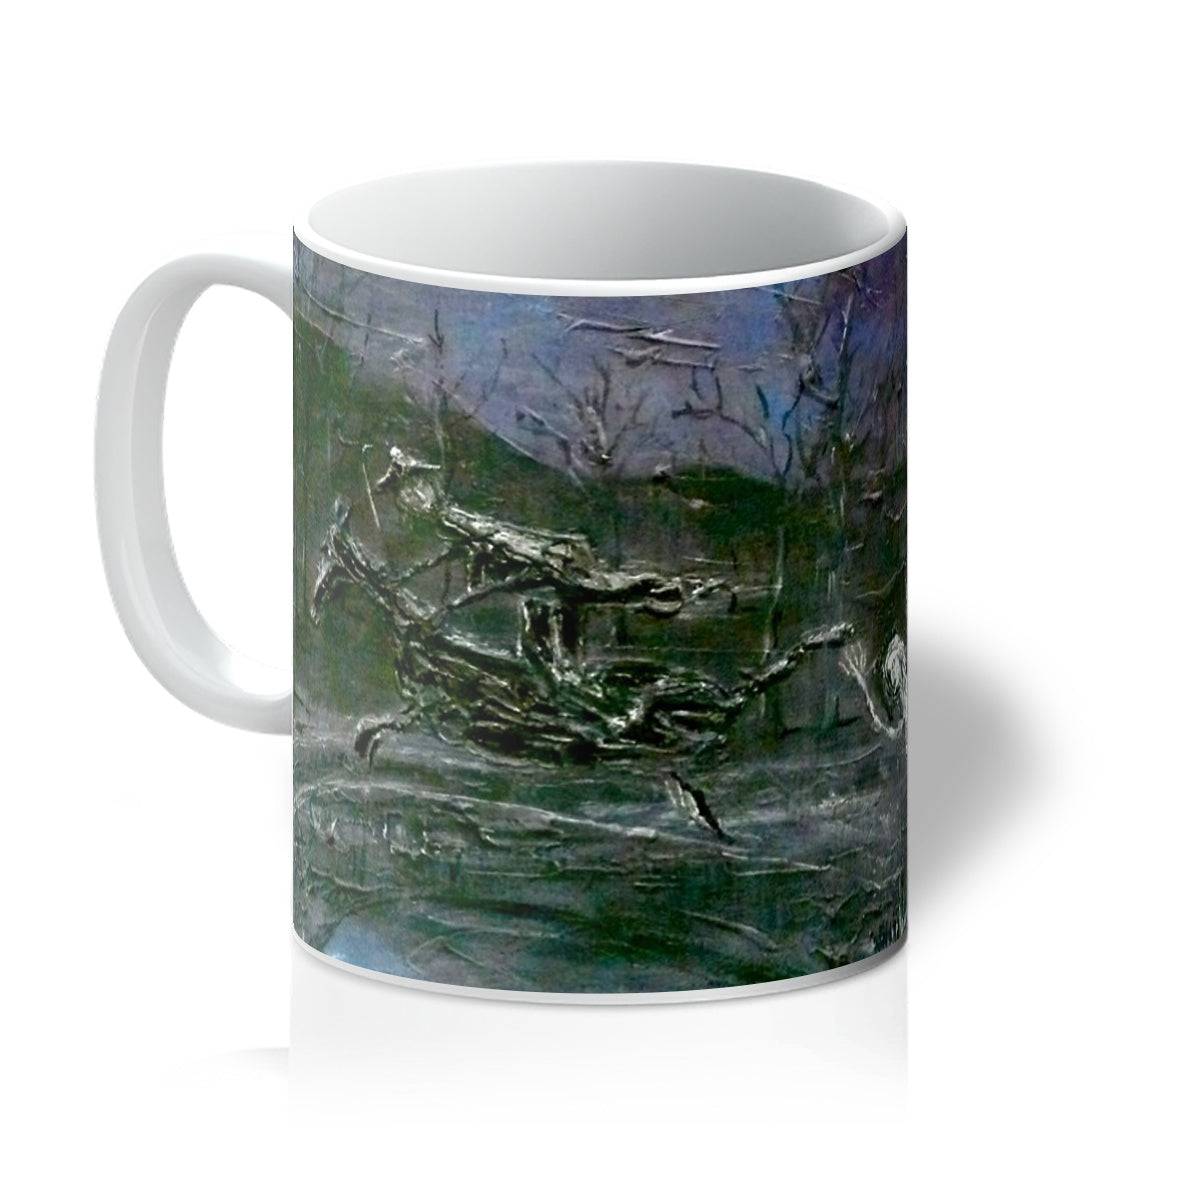 Tam O Shanter Art Gifts Mug-Mugs-Abstract & Impressionistic Art Gallery-11oz-White-Paintings, Prints, Homeware, Art Gifts From Scotland By Scottish Artist Kevin Hunter